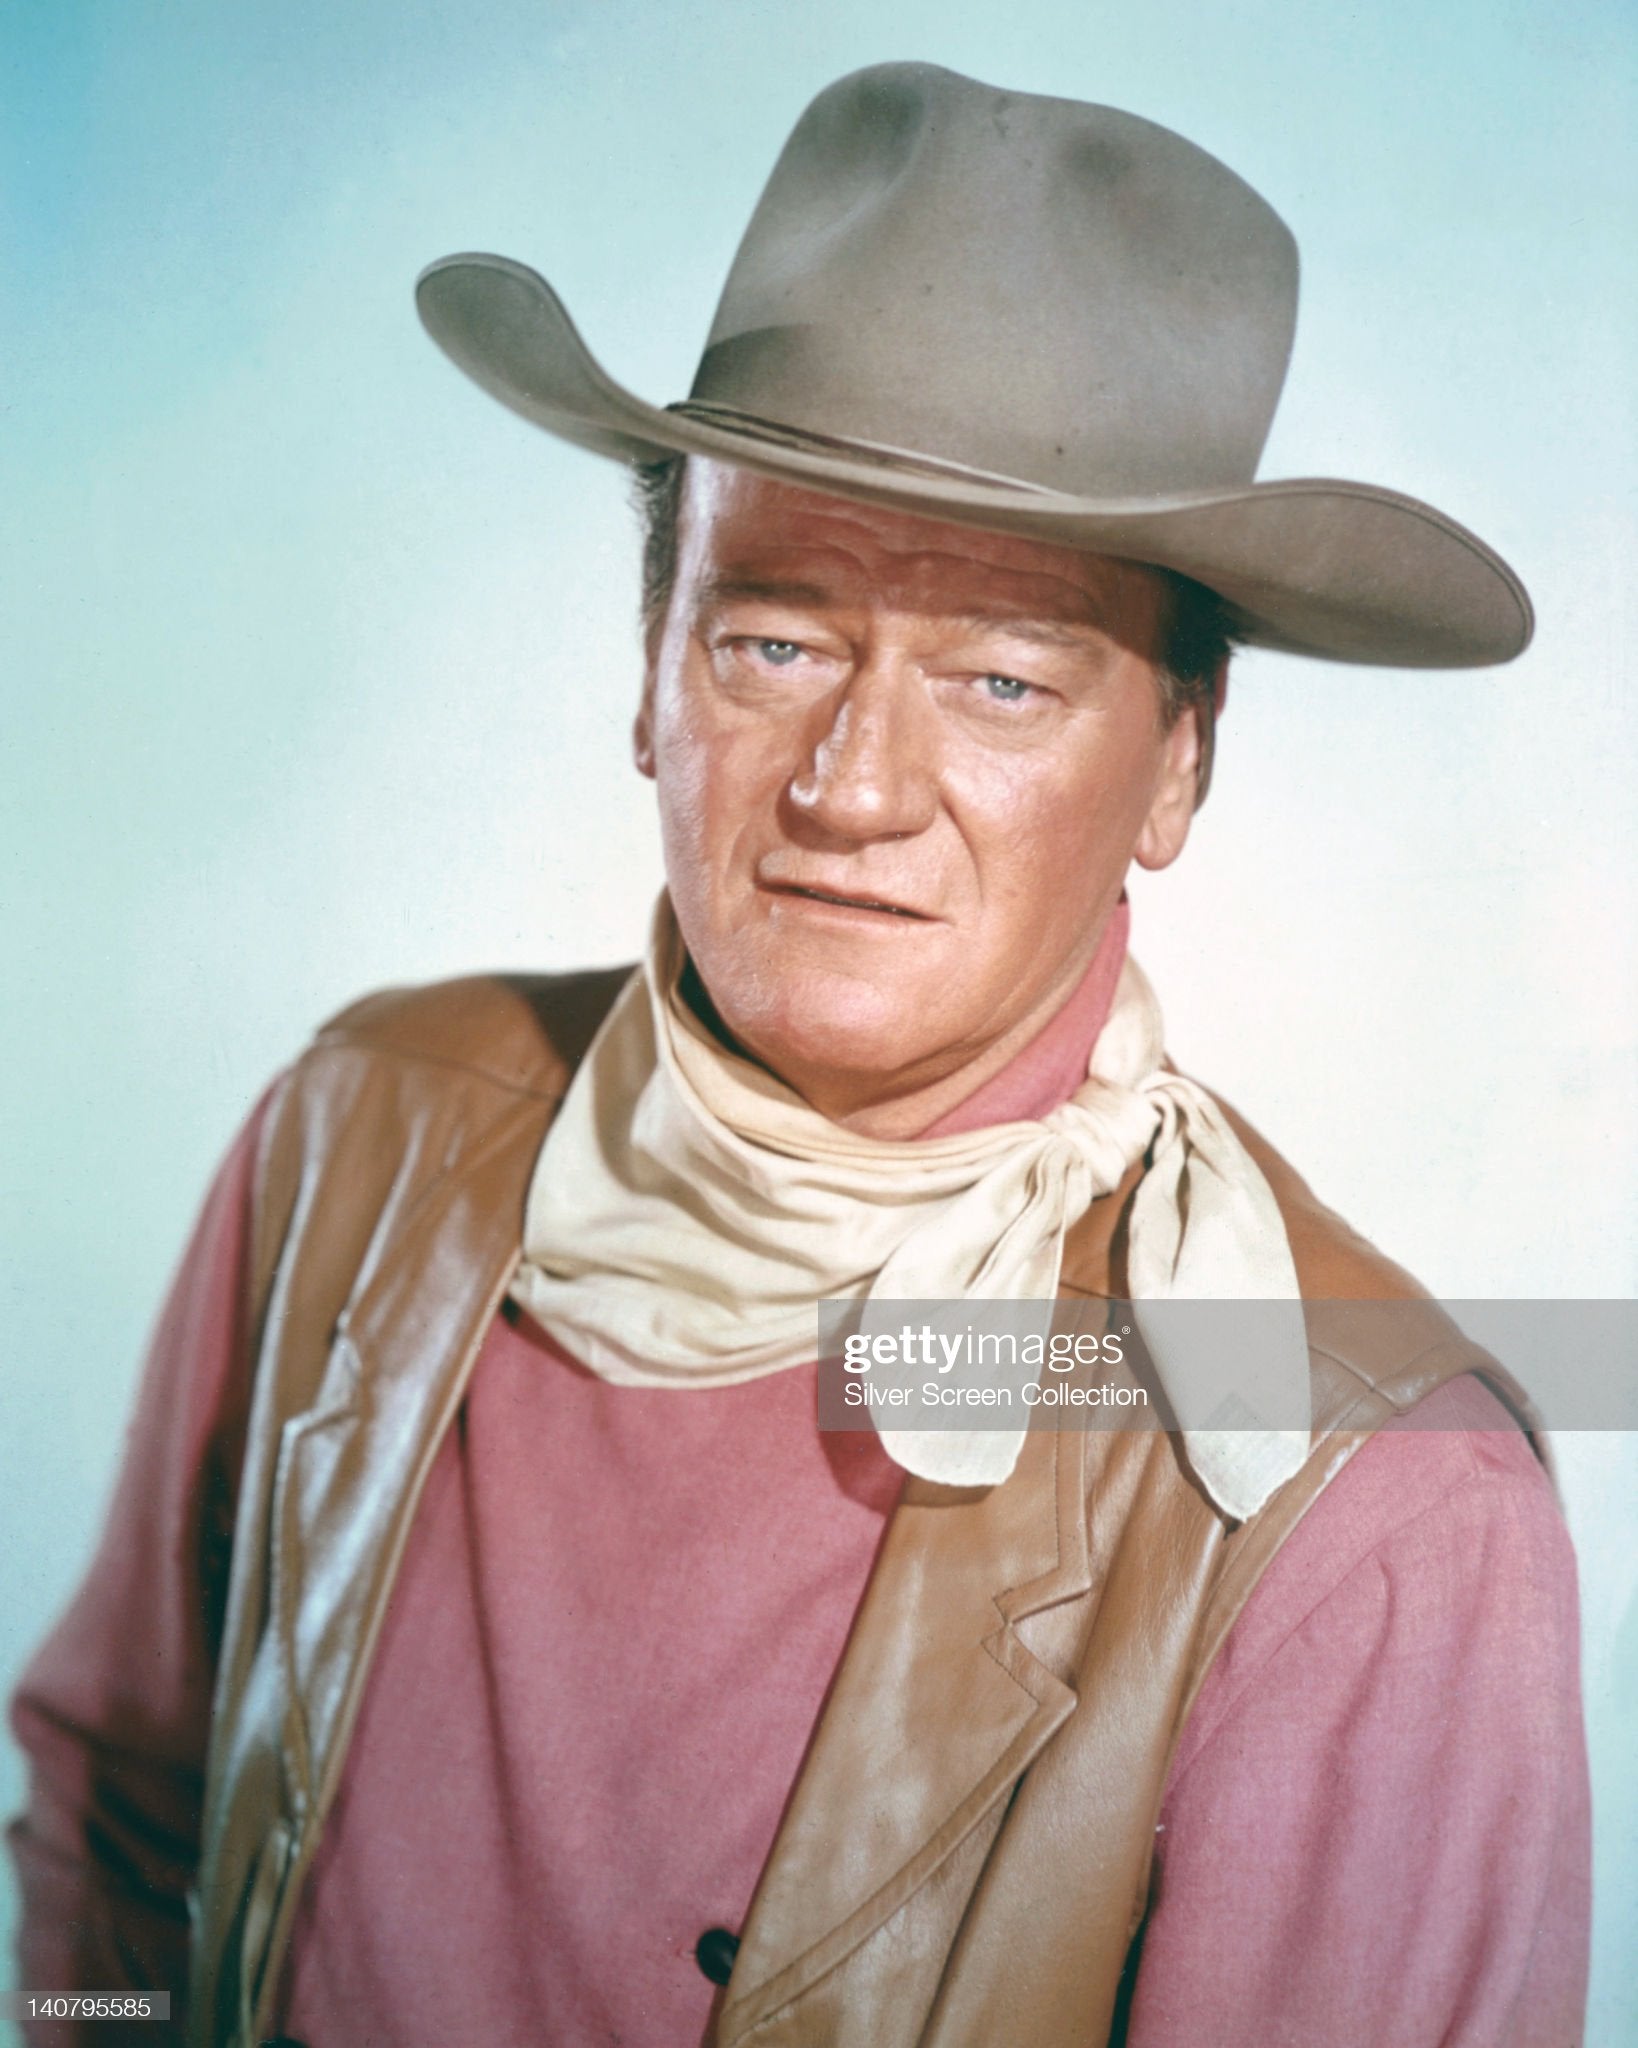 John Wayne - man not afraid of a pink shirt. Silver Screen Collection Getty Images © Studio portrait, against light blue background circa 1970.